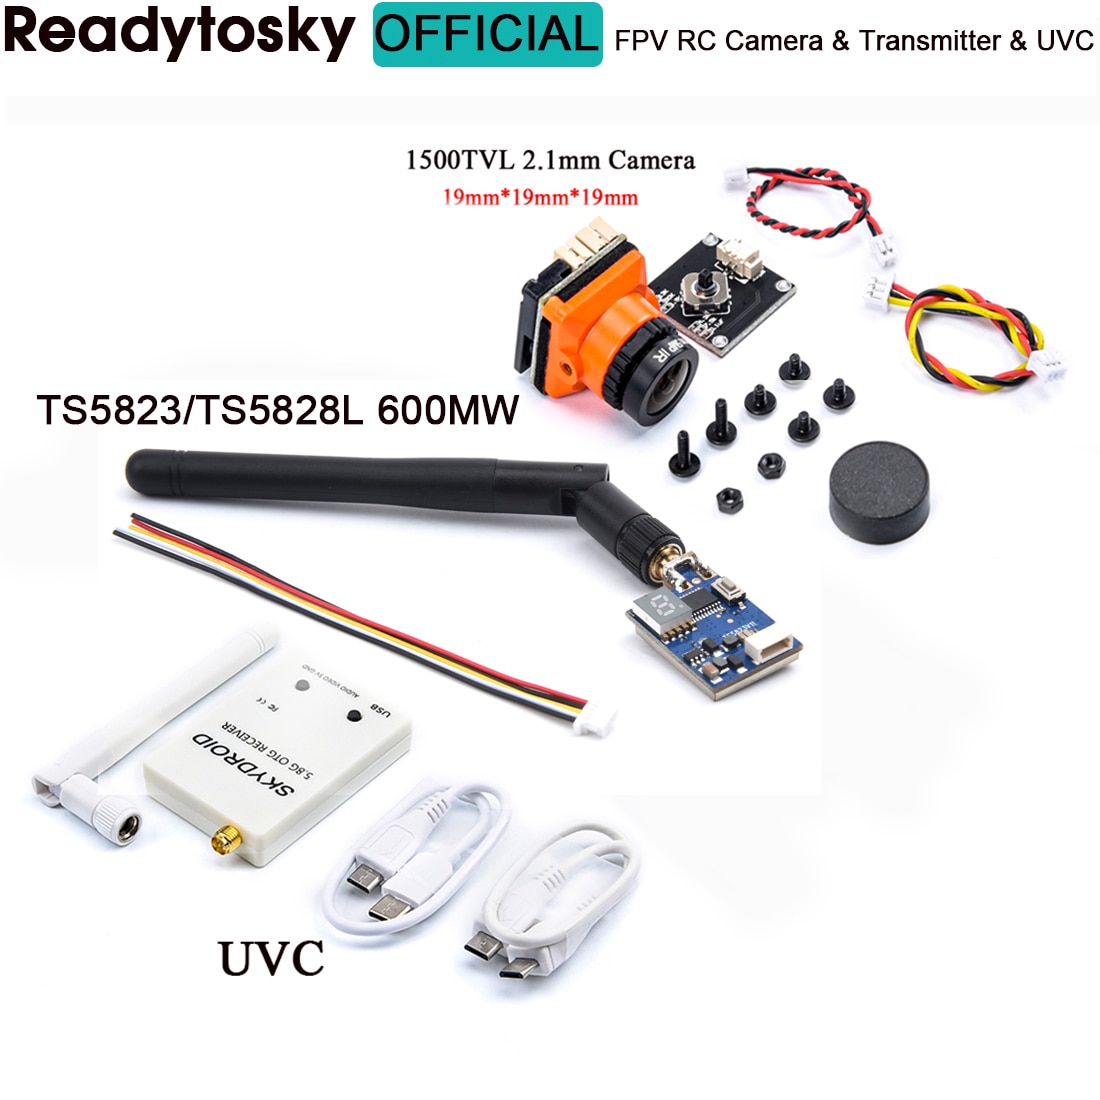 Micro FPV Transmitter & Camera Receiver for Drones